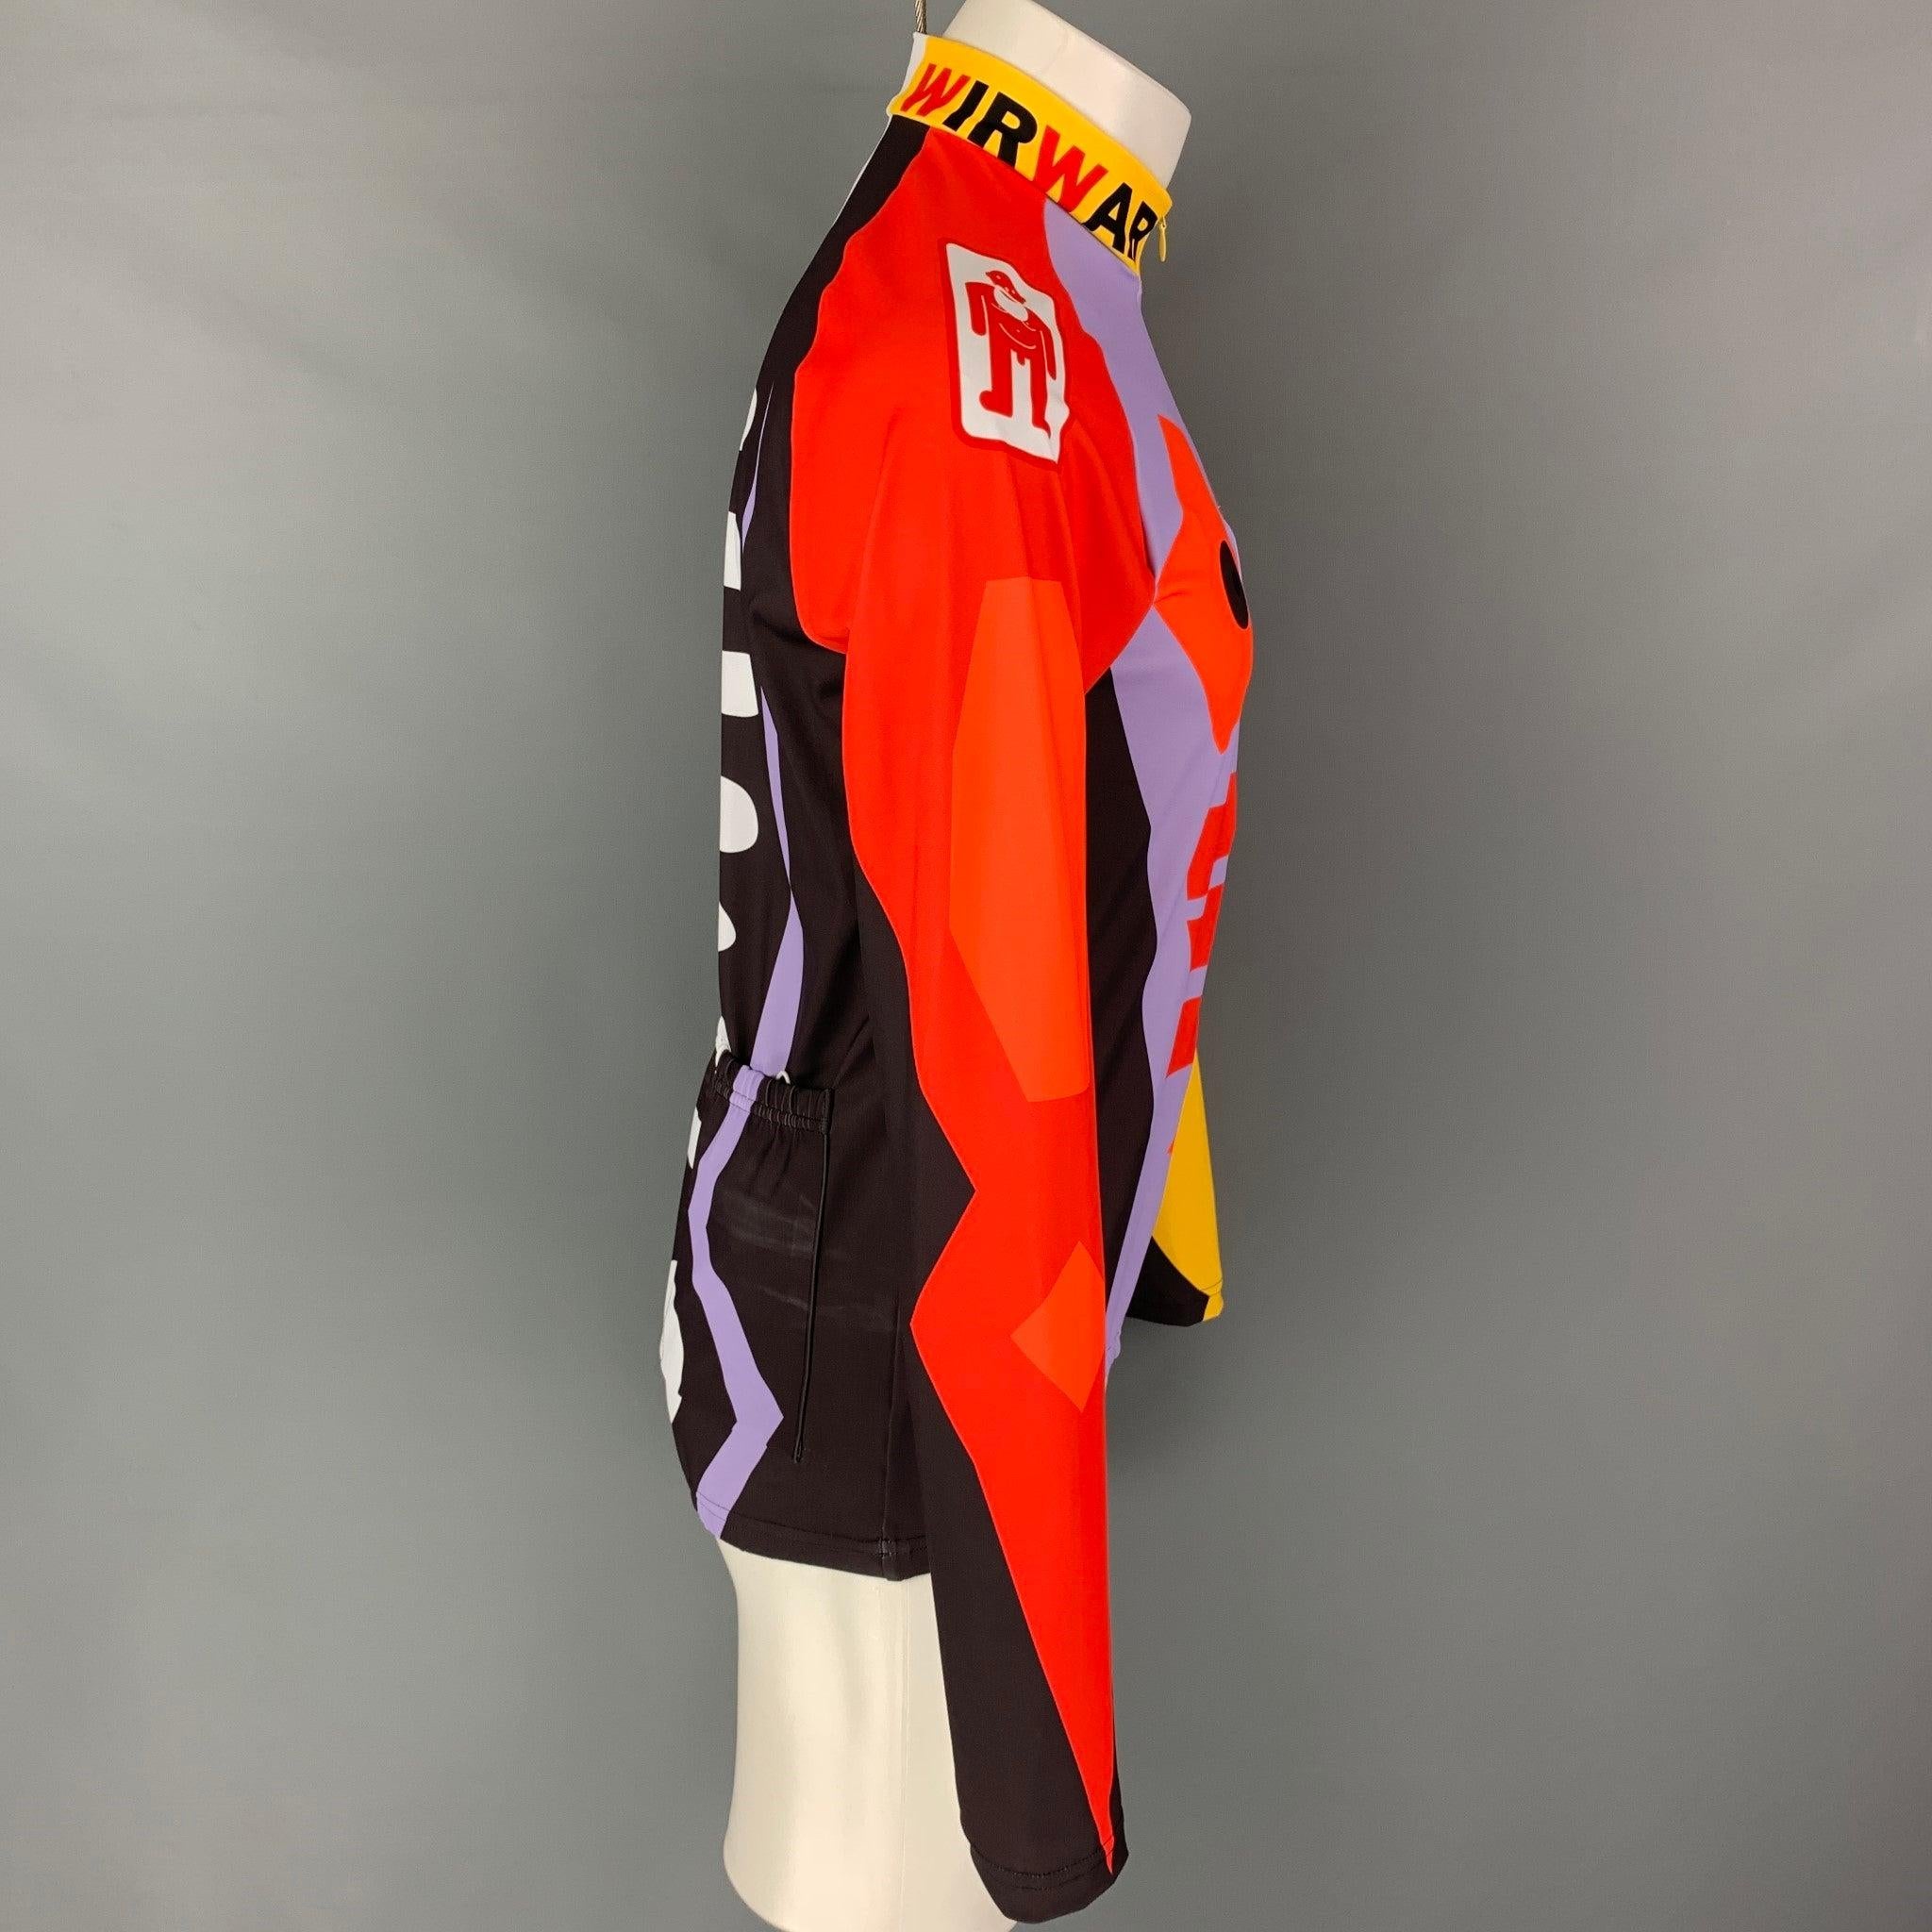 Walter Van Beirendonck Cycle Biker Jersey Pullover Top from Spring Summer 2023 WIRWAR collection. Features a quarter zip graphic print design, collar and back pockets.Introduced as part of Walter Van Beirendonck’s W< collections during the early